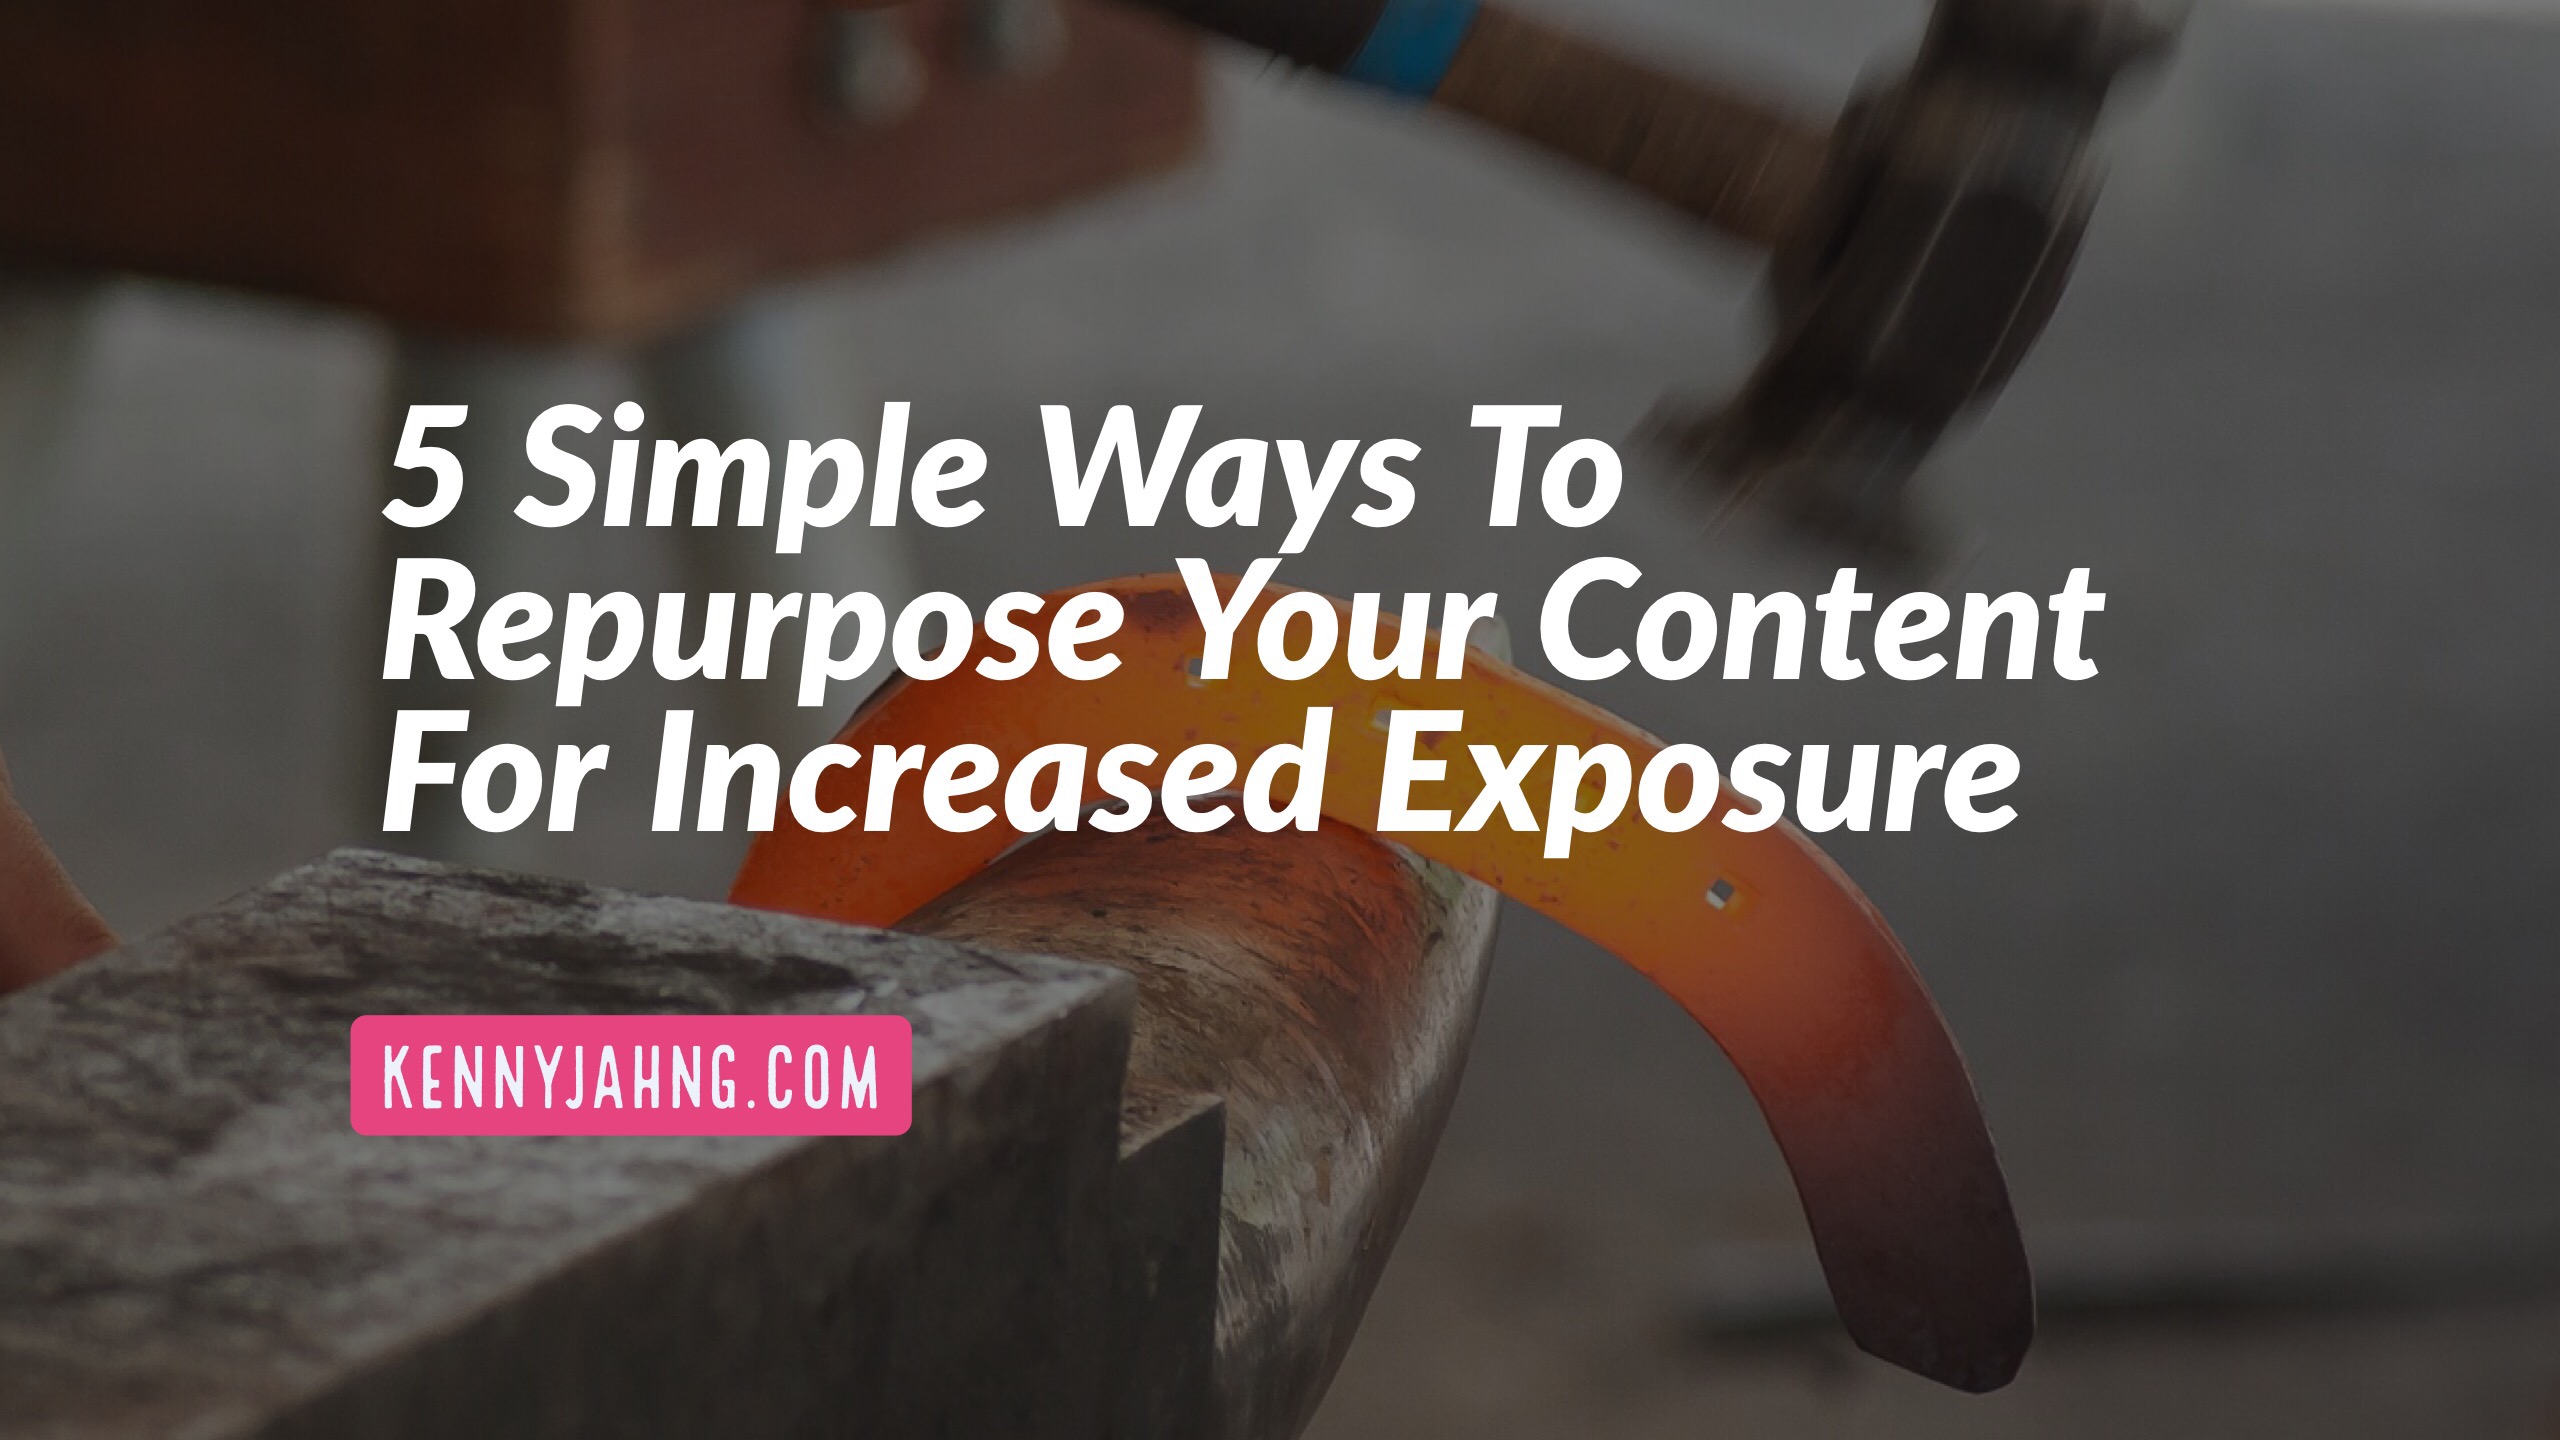 5 Simple Ways To Repurpose Your Content For Increased Exposure